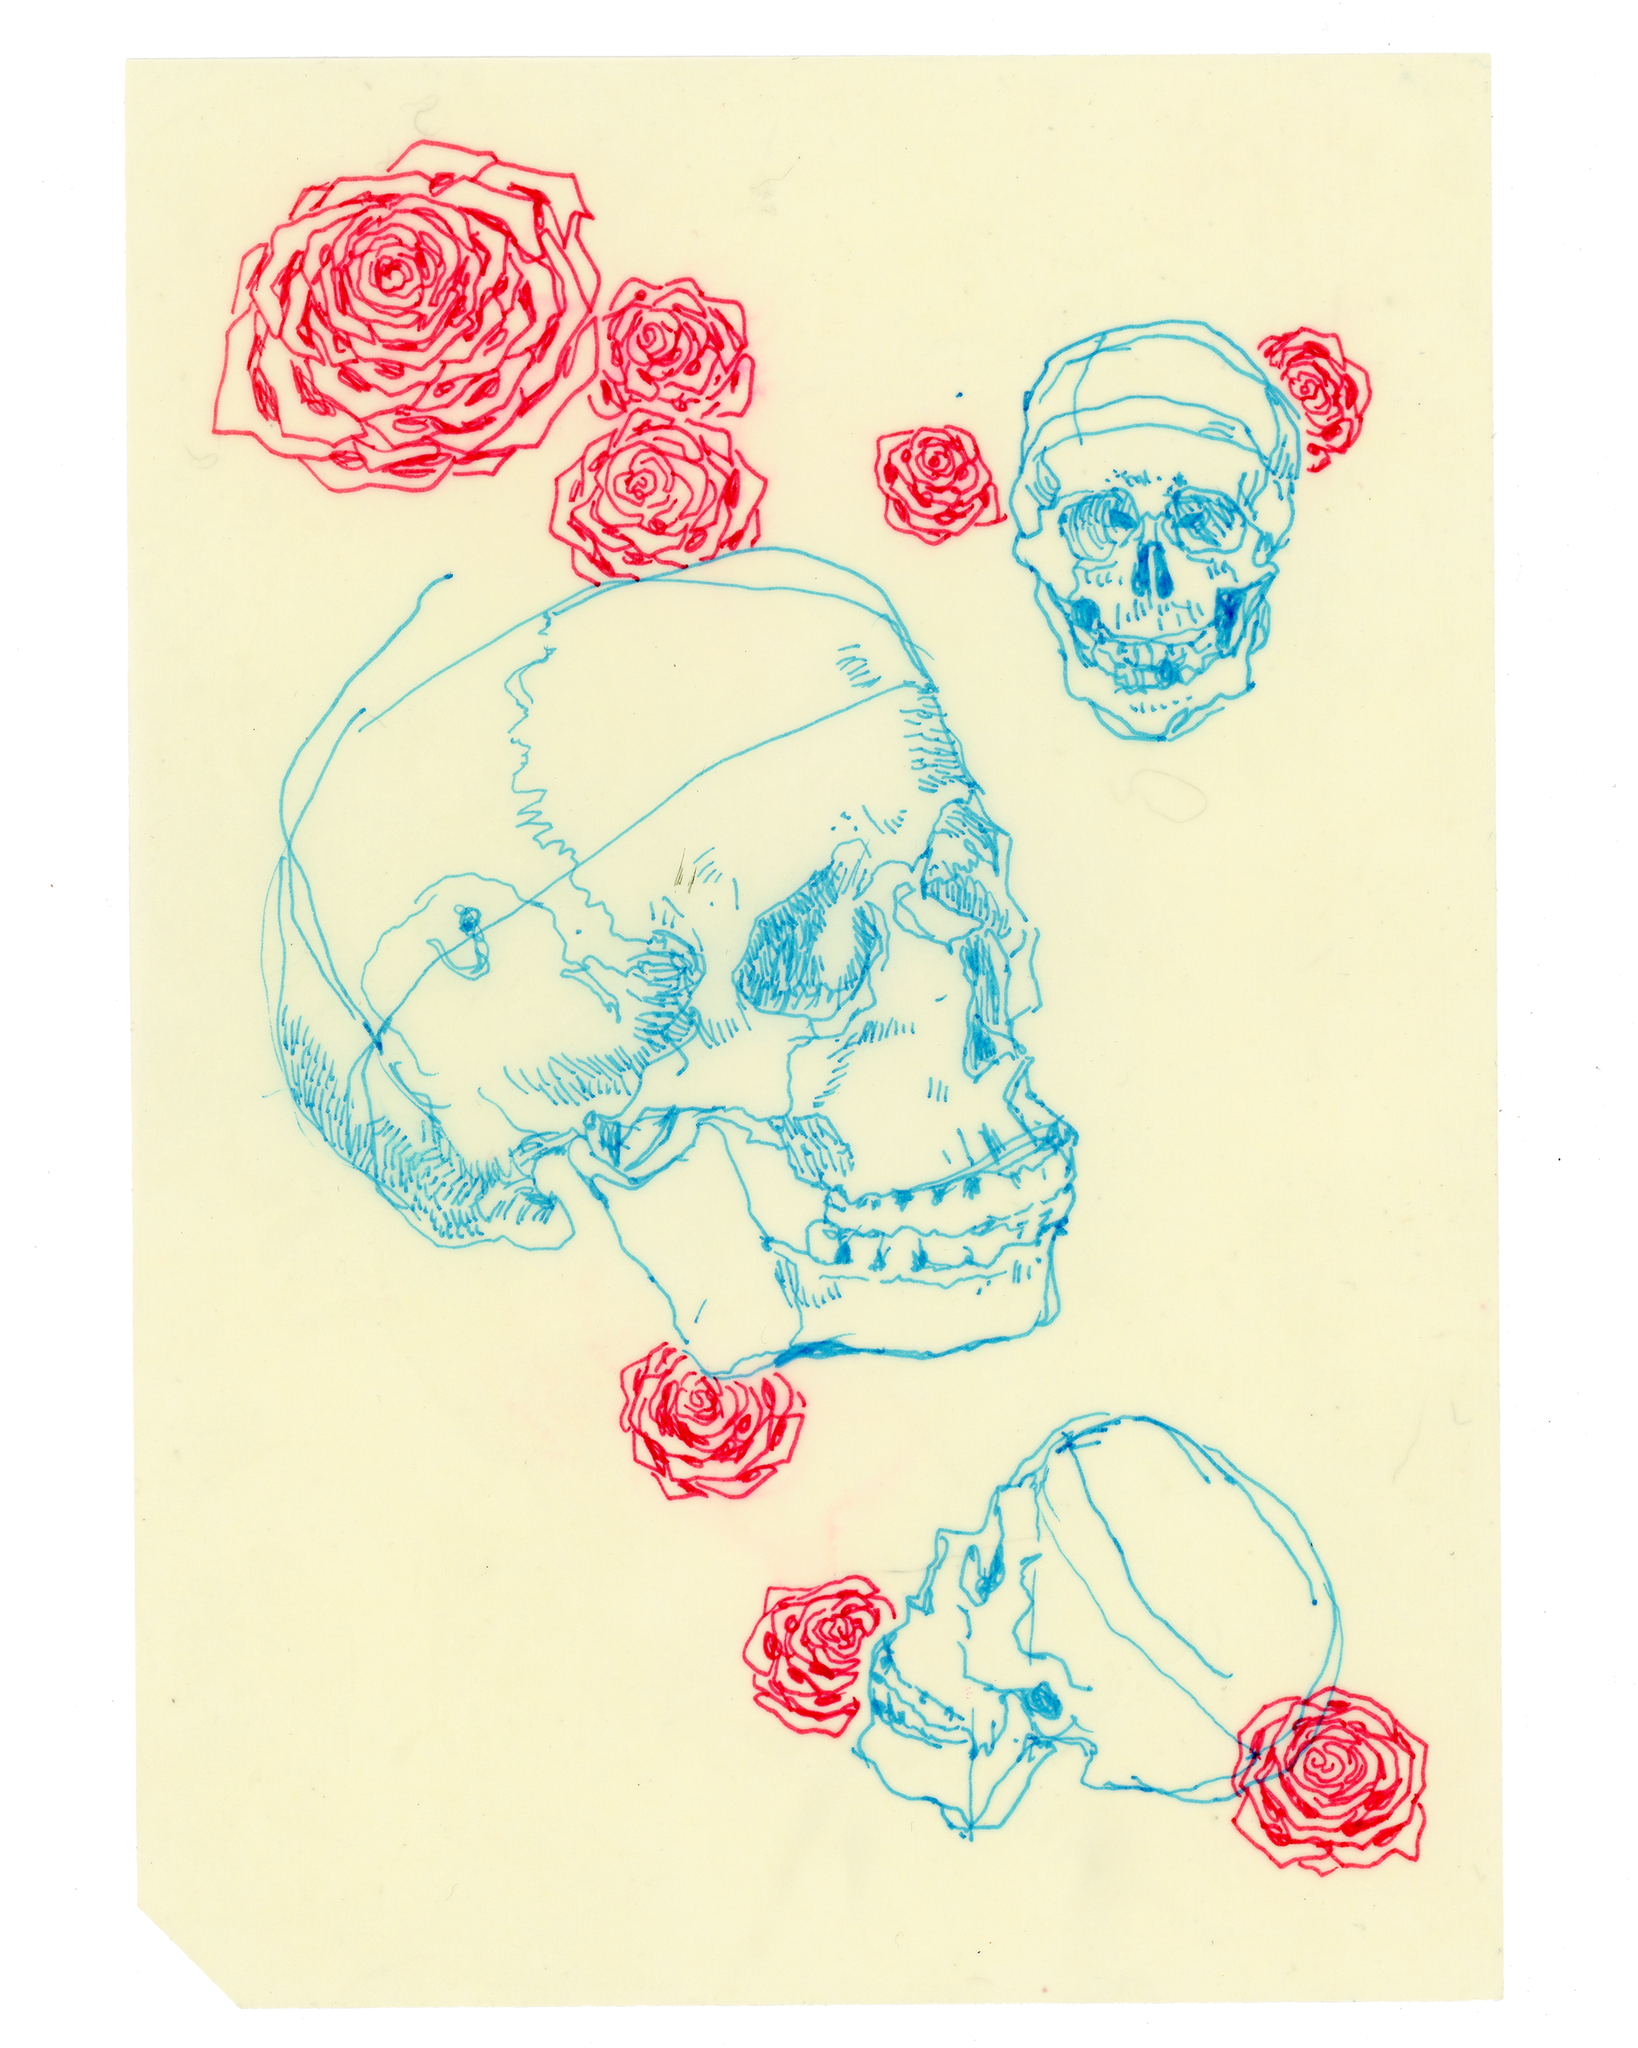 Drawing #112: "Skull Study #4: Tosca and Roses" [Beeswaxed Midori A5 paper]